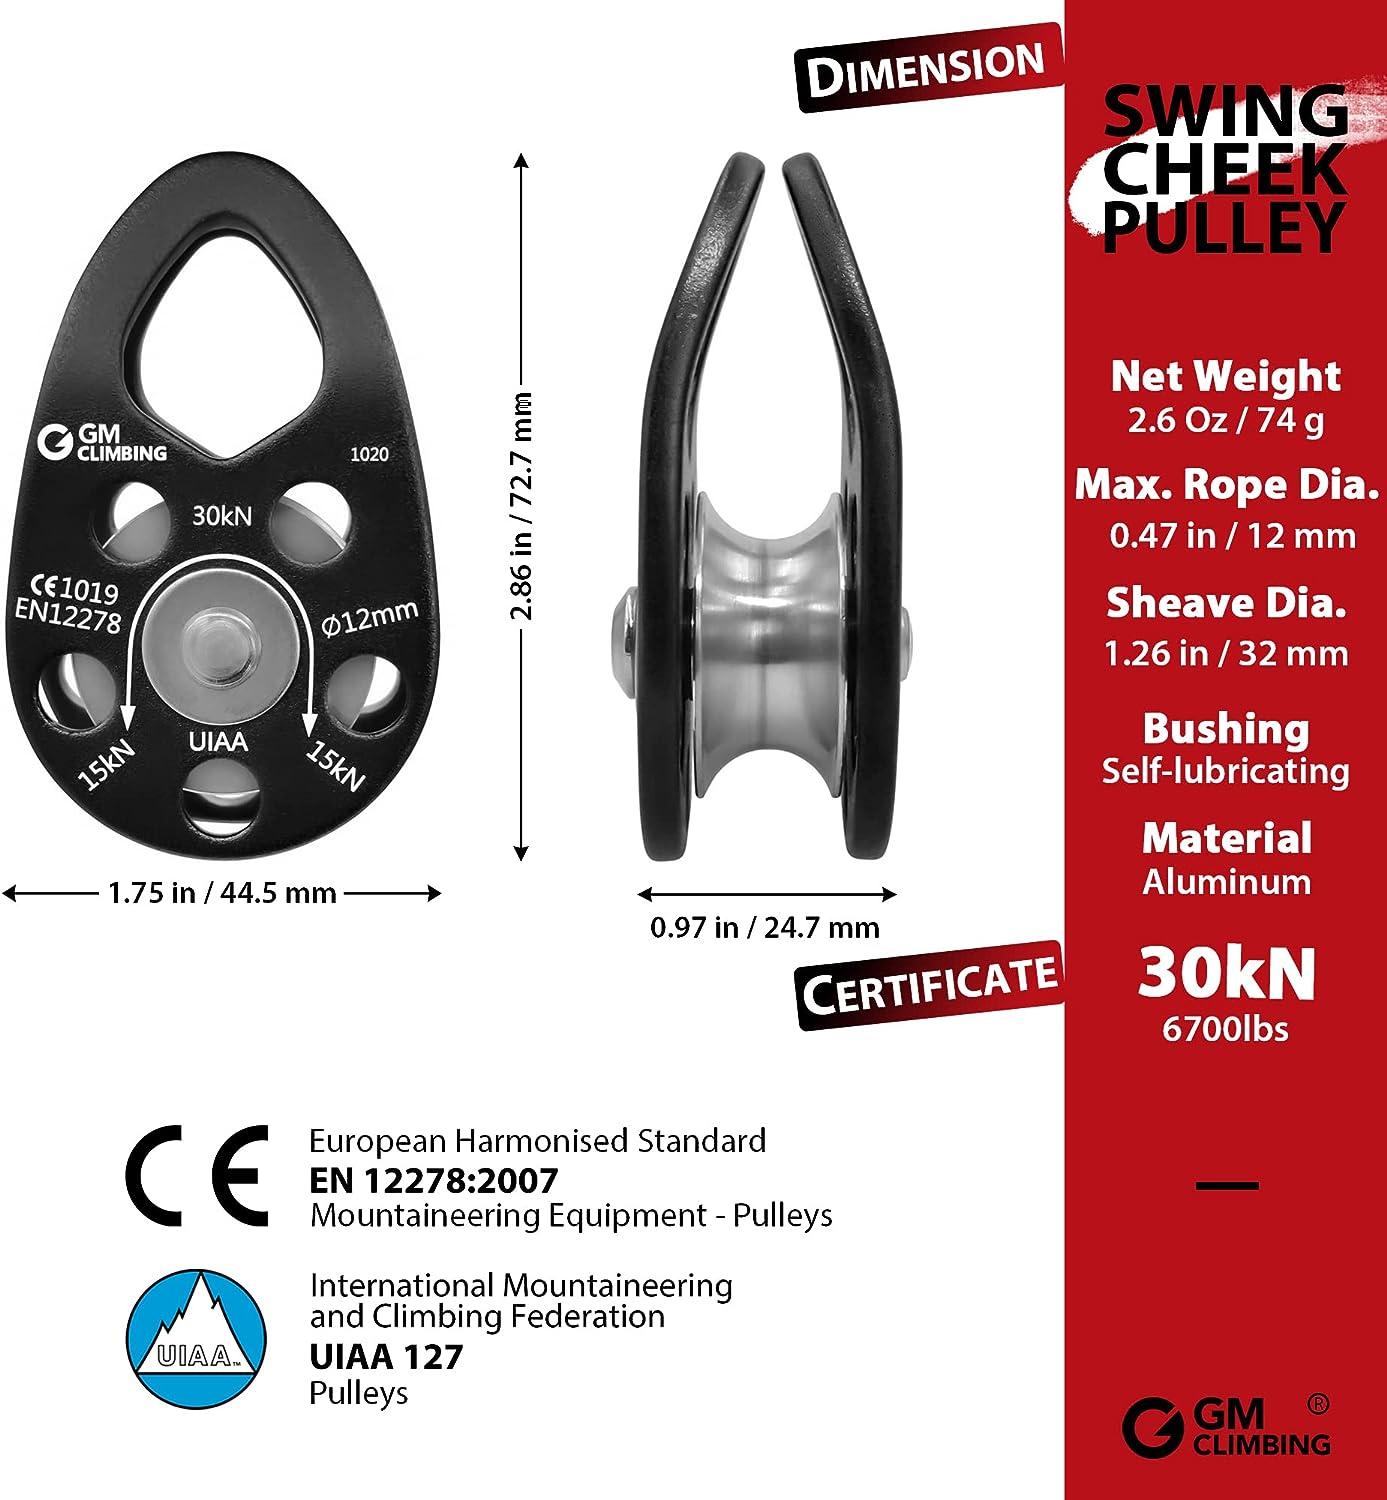 GM CLIMBING Hitch Slack Tending Pulley Kit for Double Rope Climbing System  Basic Unit of General Hauling - 30kN Swing Cheek Micro Pulley & Oval  Locking Carabiner & 30in 8mm VT Prusik